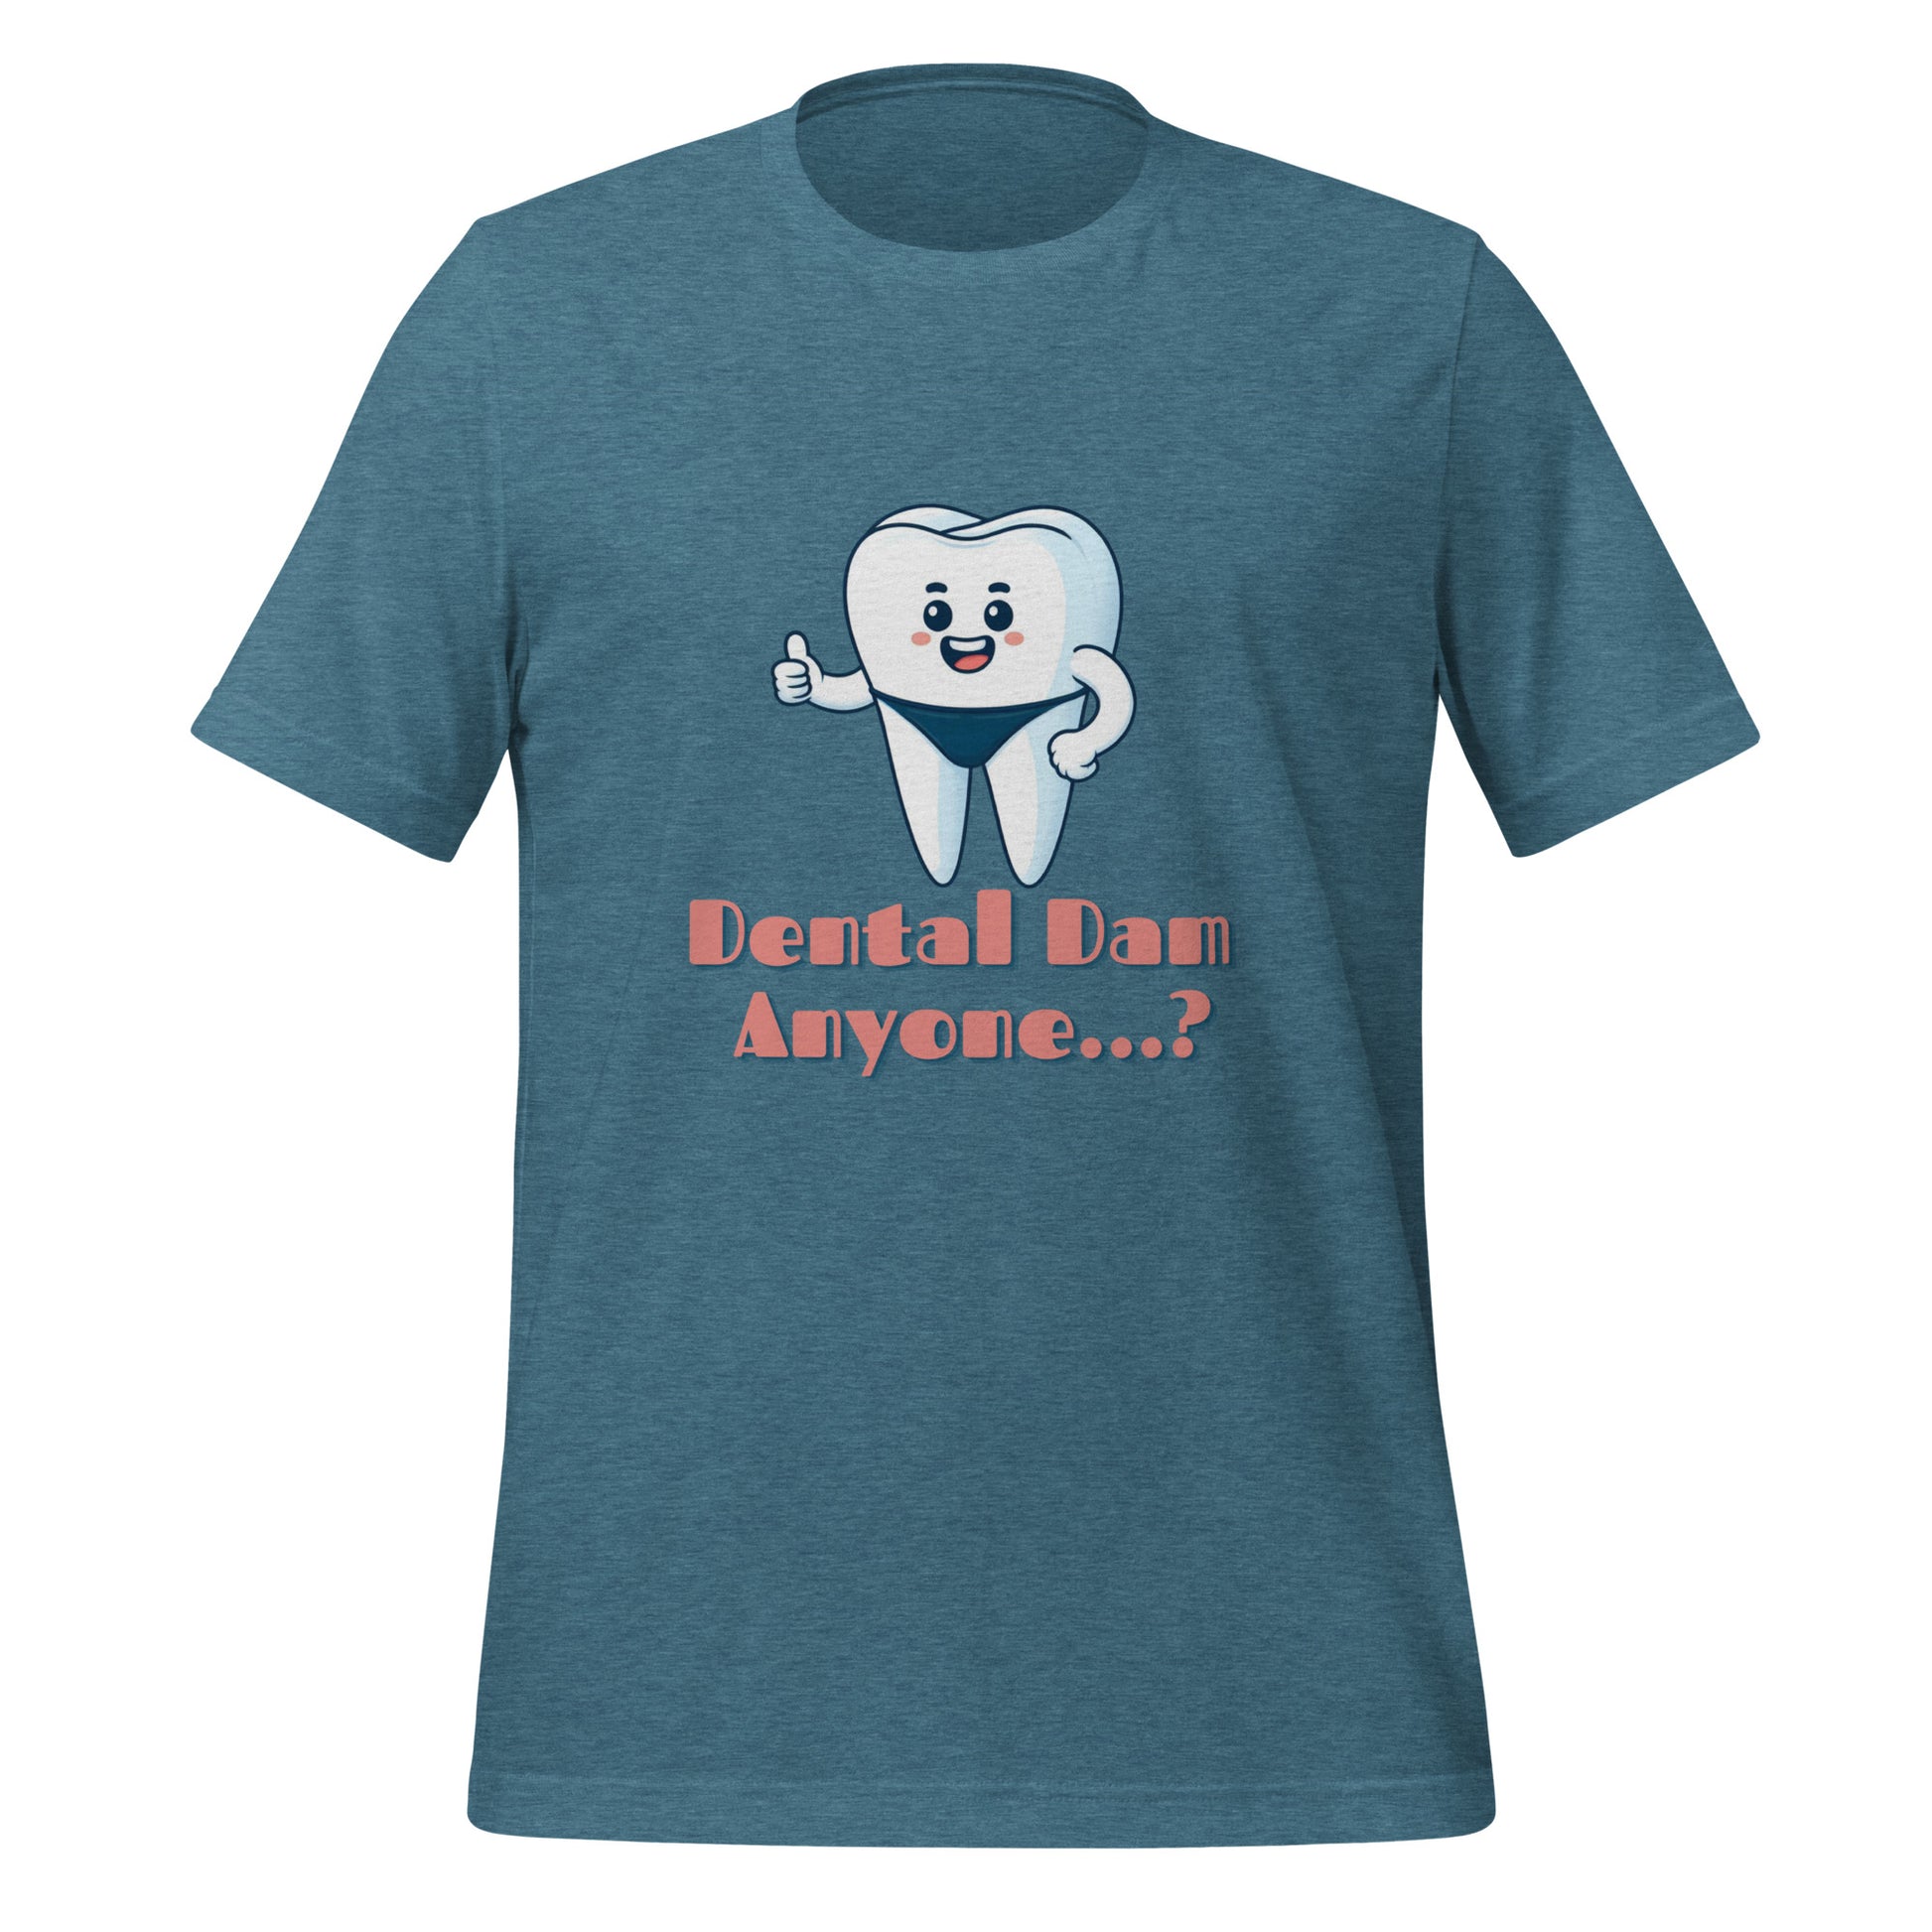 Funny dental shirt featuring a playful tooth character in a speedo with the text ‘Dental Dam Anyone?’, perfect for dentists, dental hygienists, and dental students who enjoy dental humor. This dental shirt is a unique addition to any dental professional’s wardrobe, making it an ideal dental office shirt. Don’t miss out on our dental assistant shirts and dental hygiene shirts. Heather deep teal color.